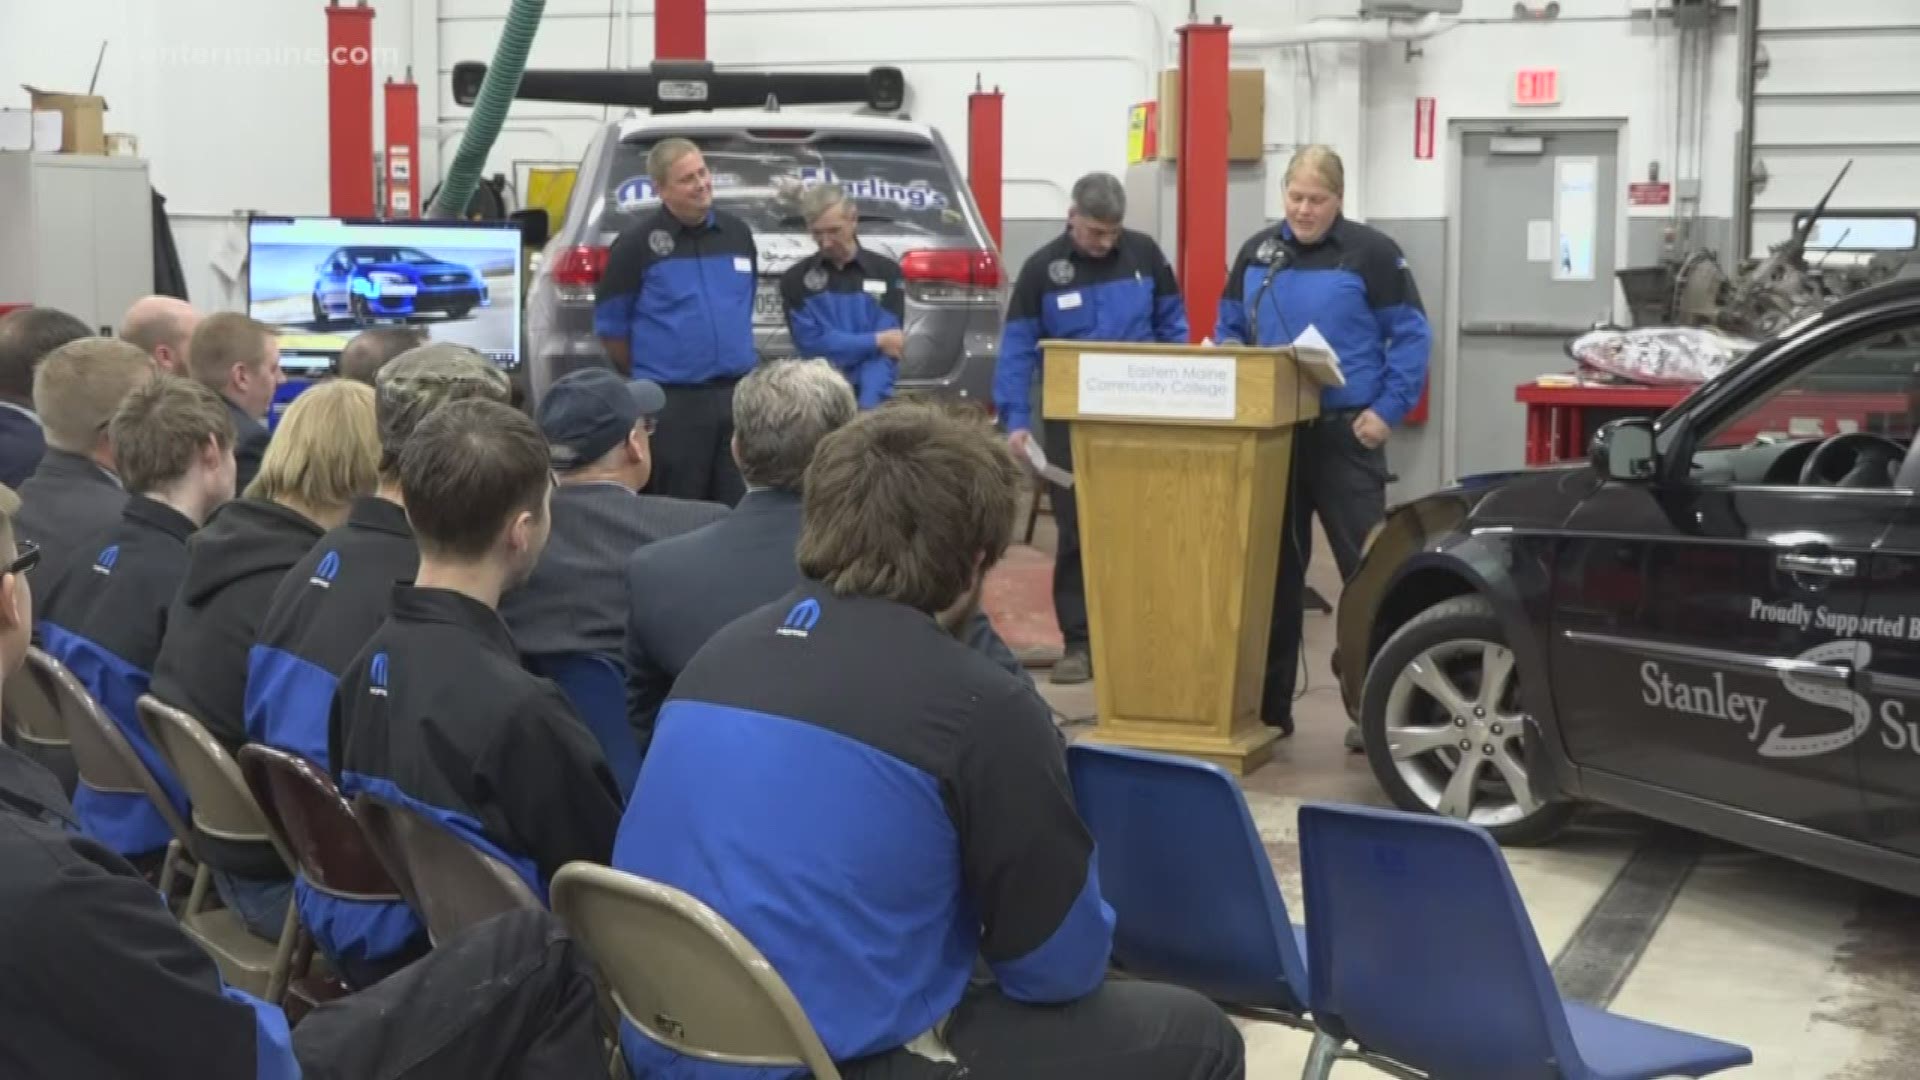 The automotive program at Eastern Maine Community College has more opportunities after Subaru donates a car to them.